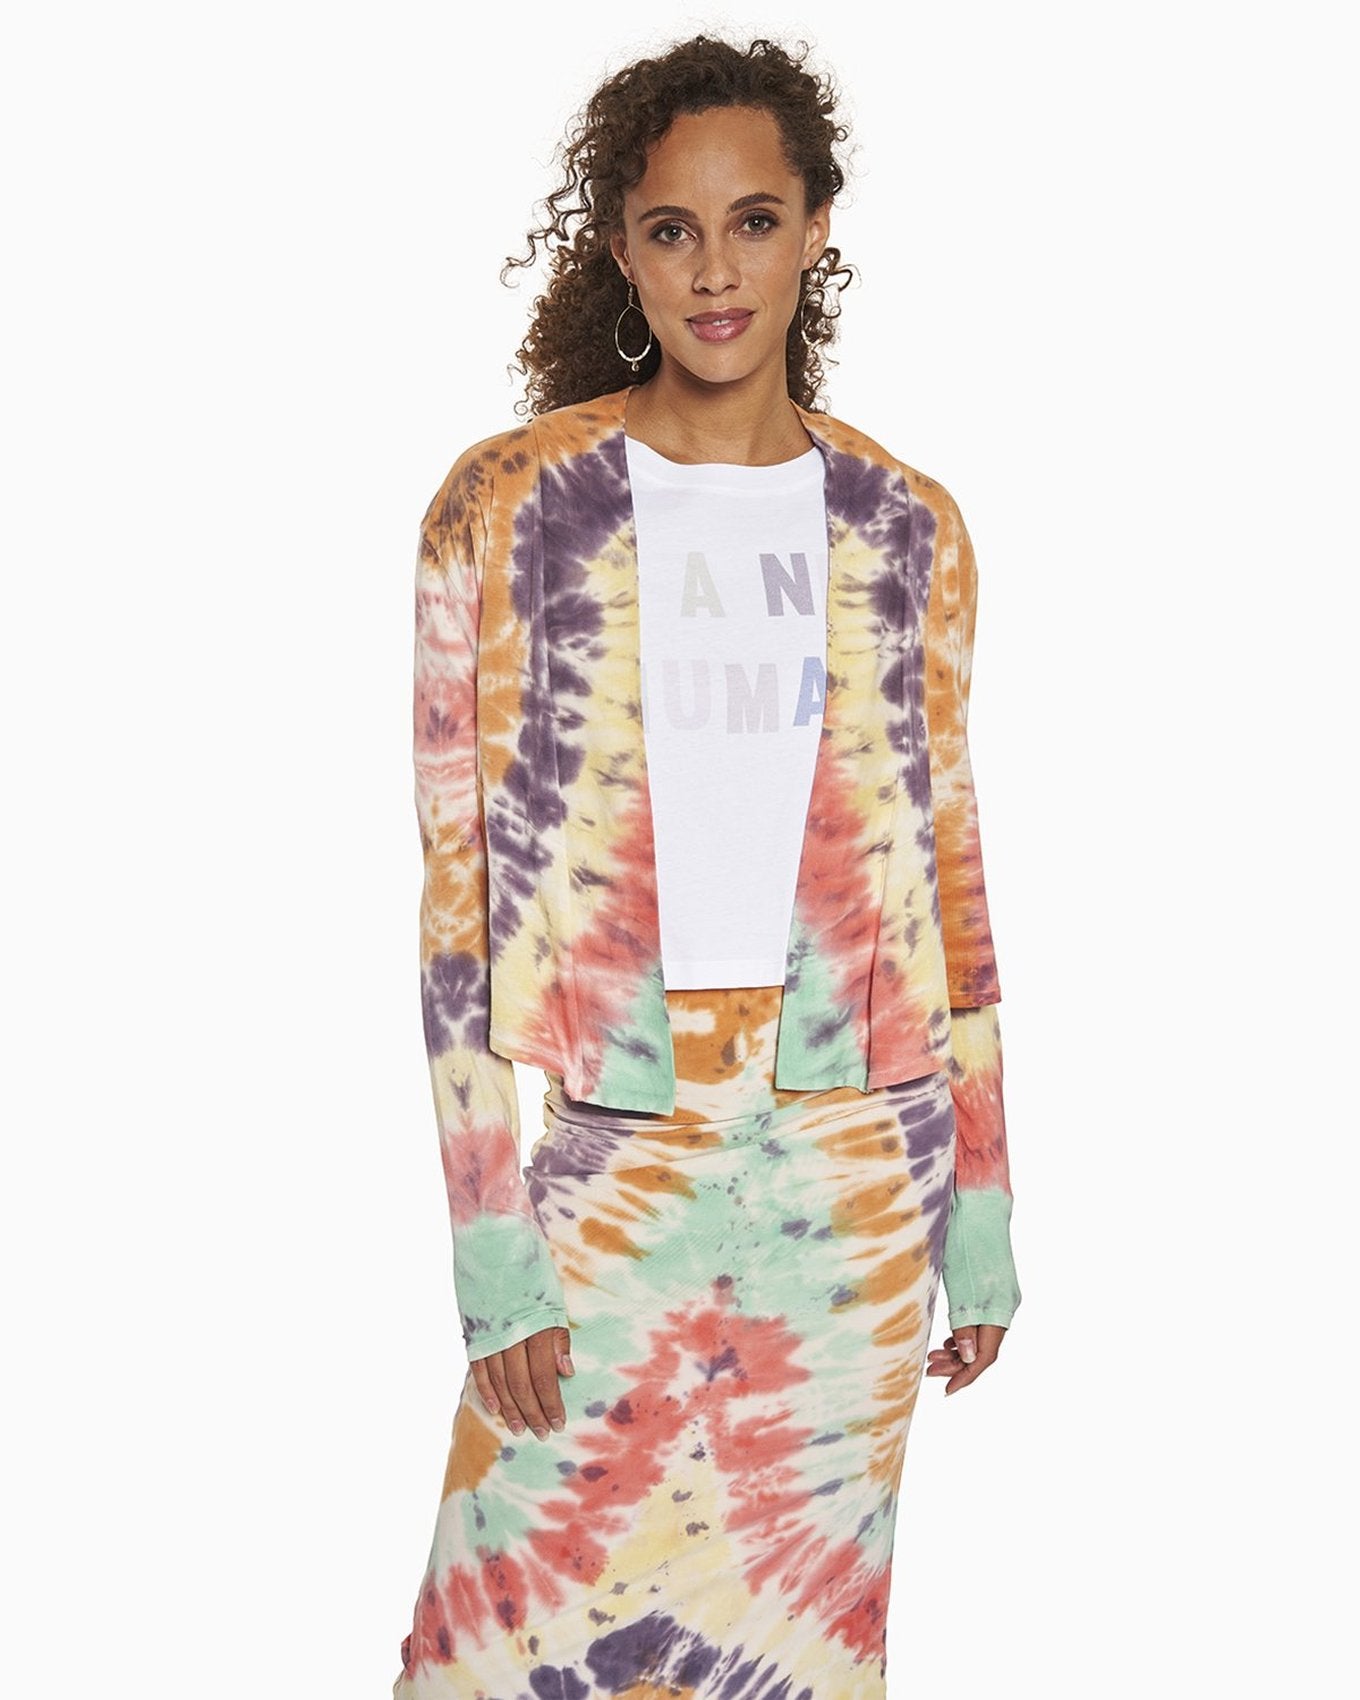 YesAnd Organic Tie Dye Midi Pencil Skirt Pencil Skirt in color Multi Tie Dye C01 and shape pencil